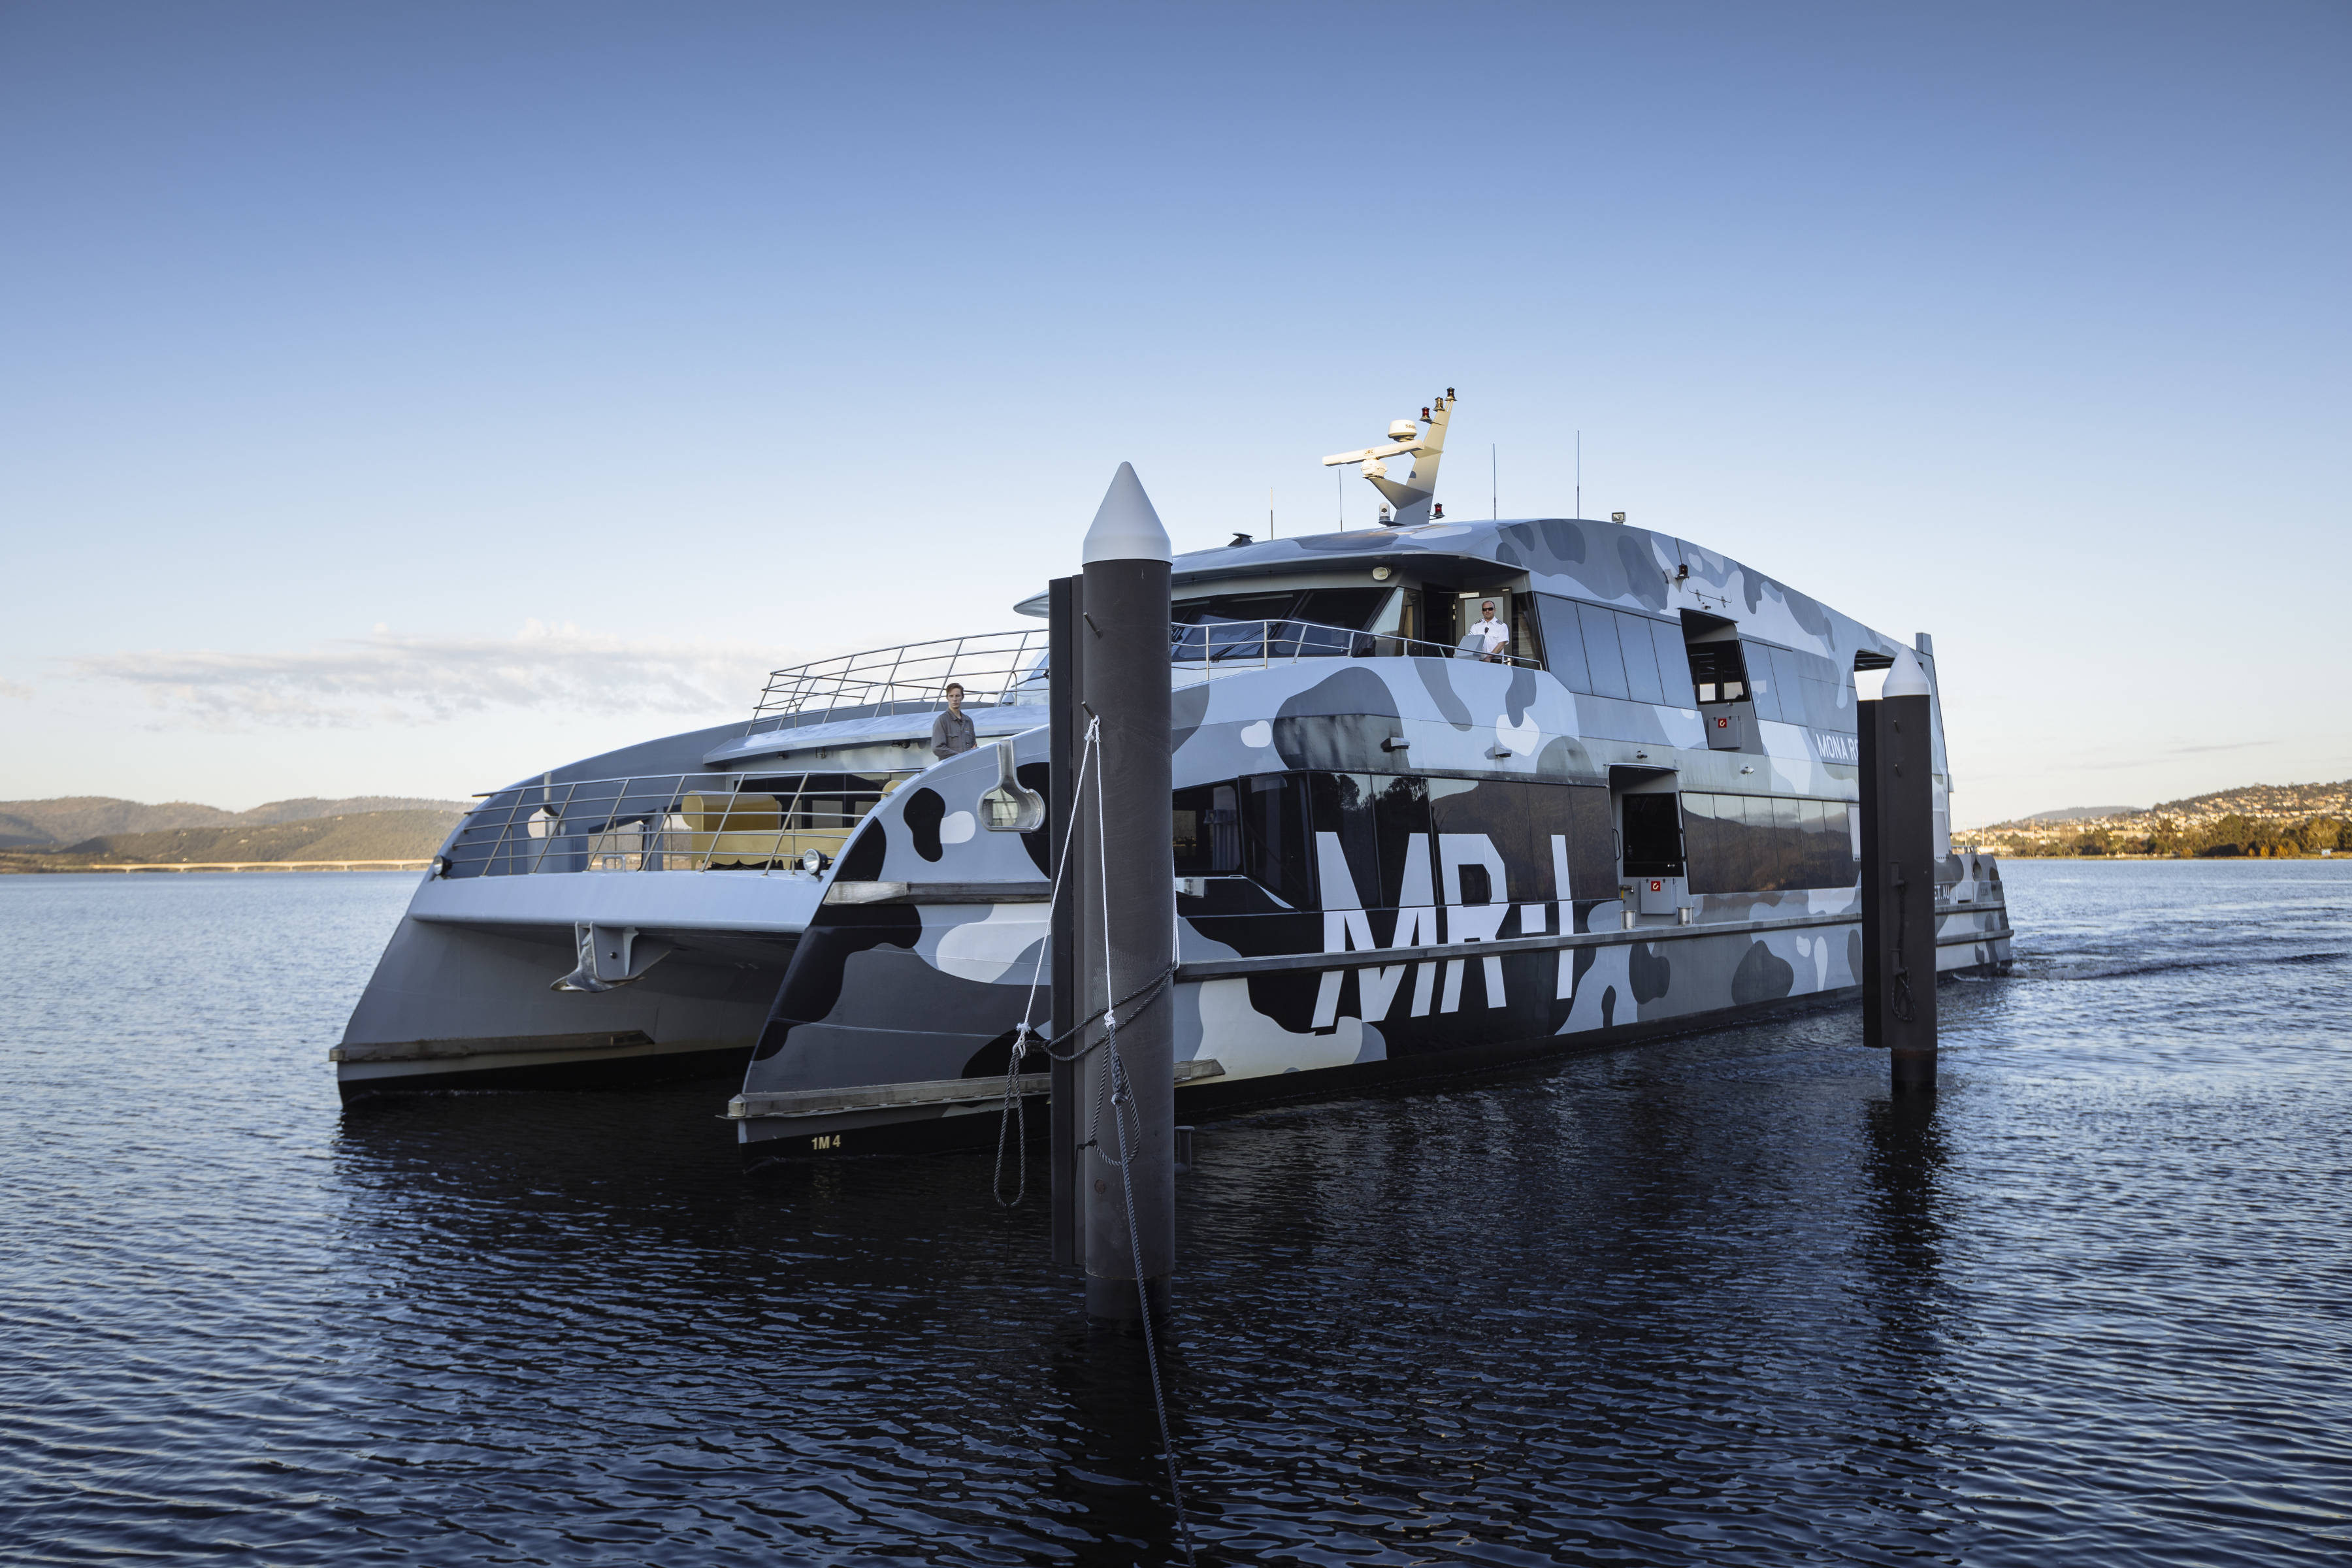 The Mona Roma ferry, MR-I, featuring blue and grey camouflaged exterior, on the River Derwent.